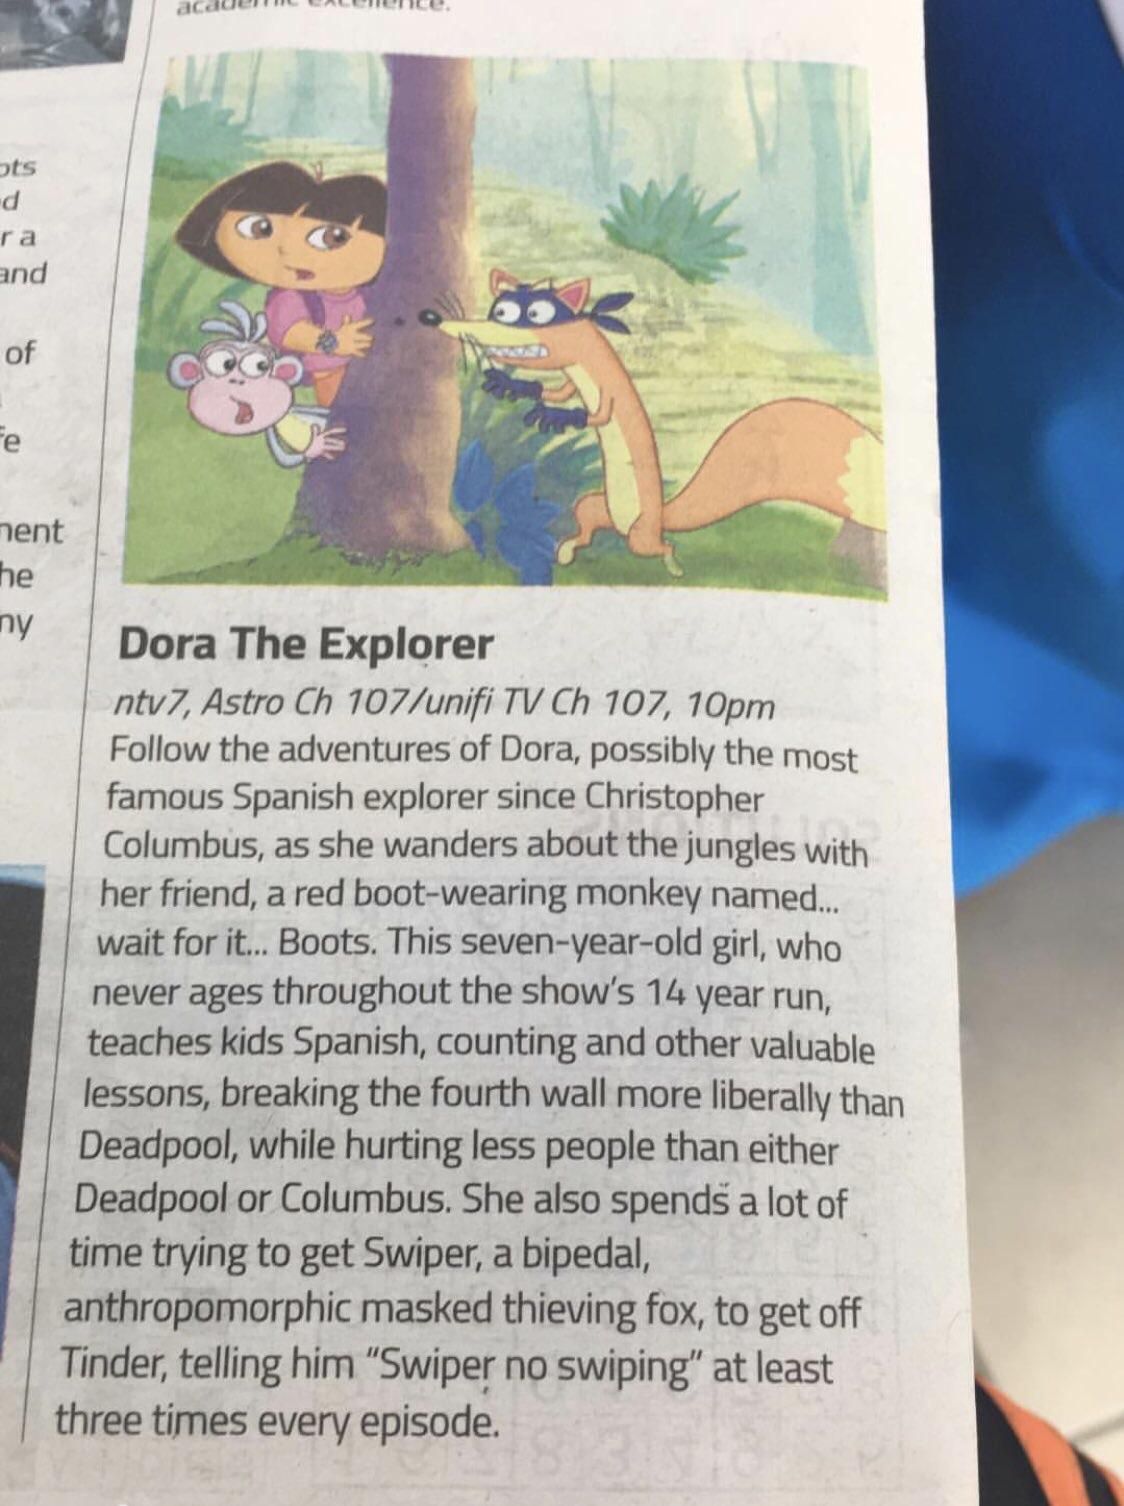 Dora The Explorer sounds interesting based on the description on this Malaysian newspaper.